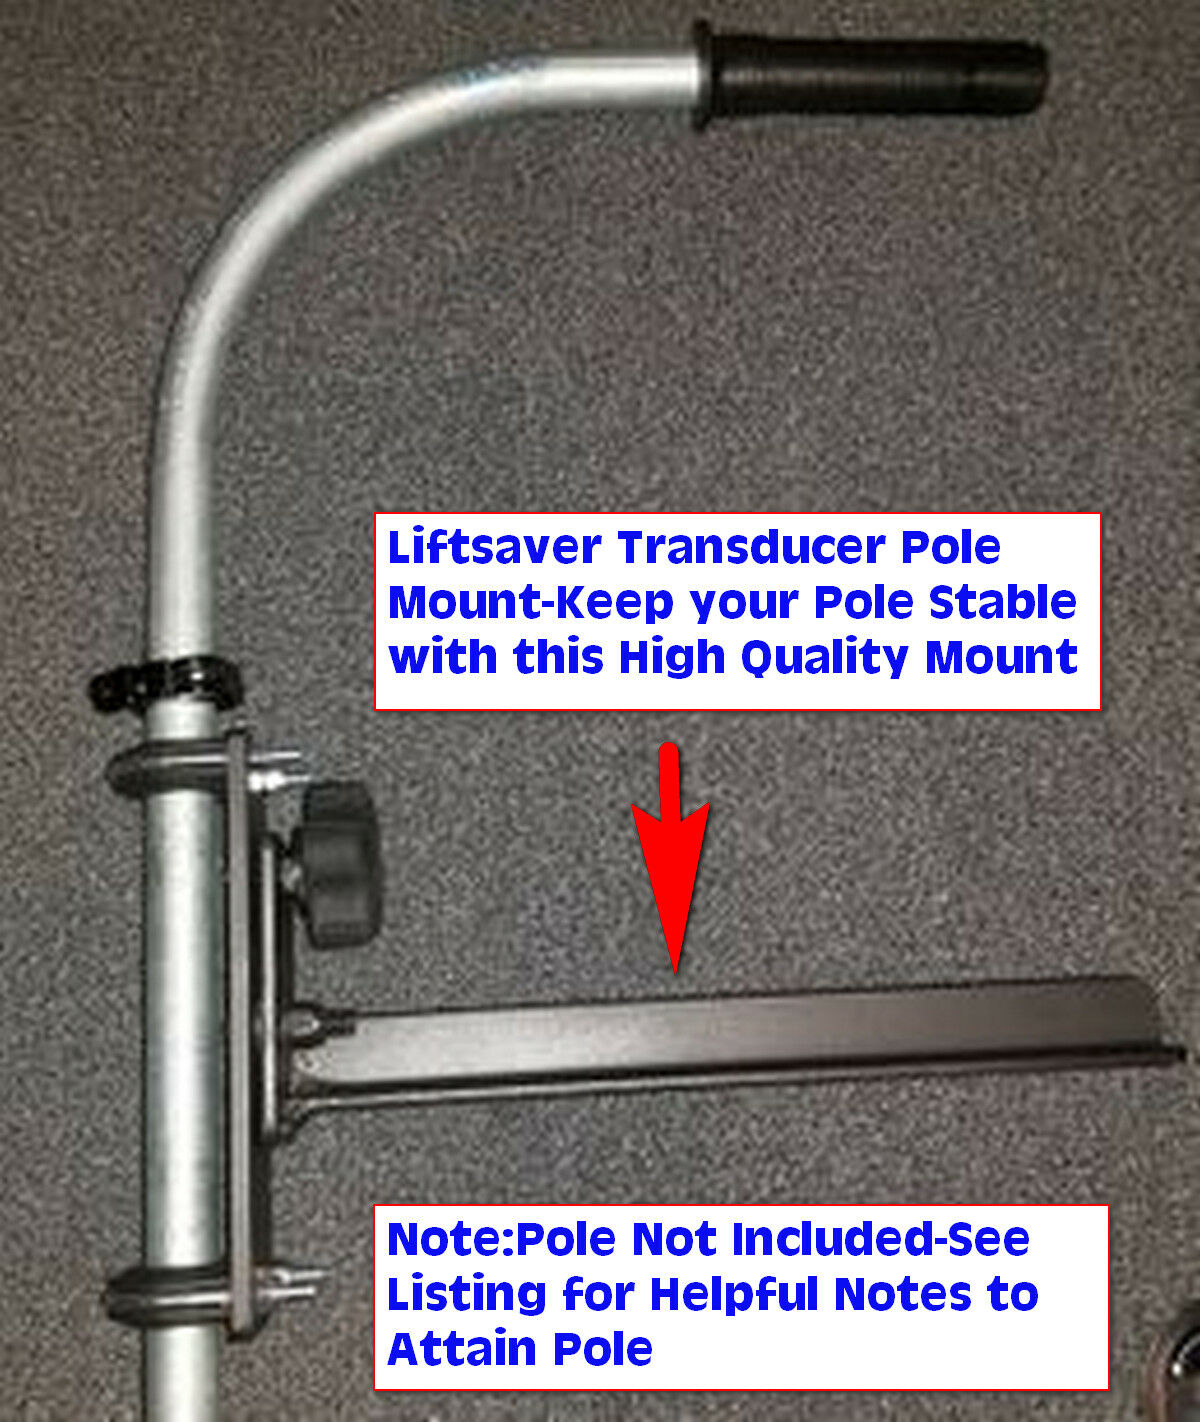 DOUBLE FISHING ROD HOLDER FOR FLOAT TUBE WITH ANGLE SPINNING ,CASTING OR  FLY